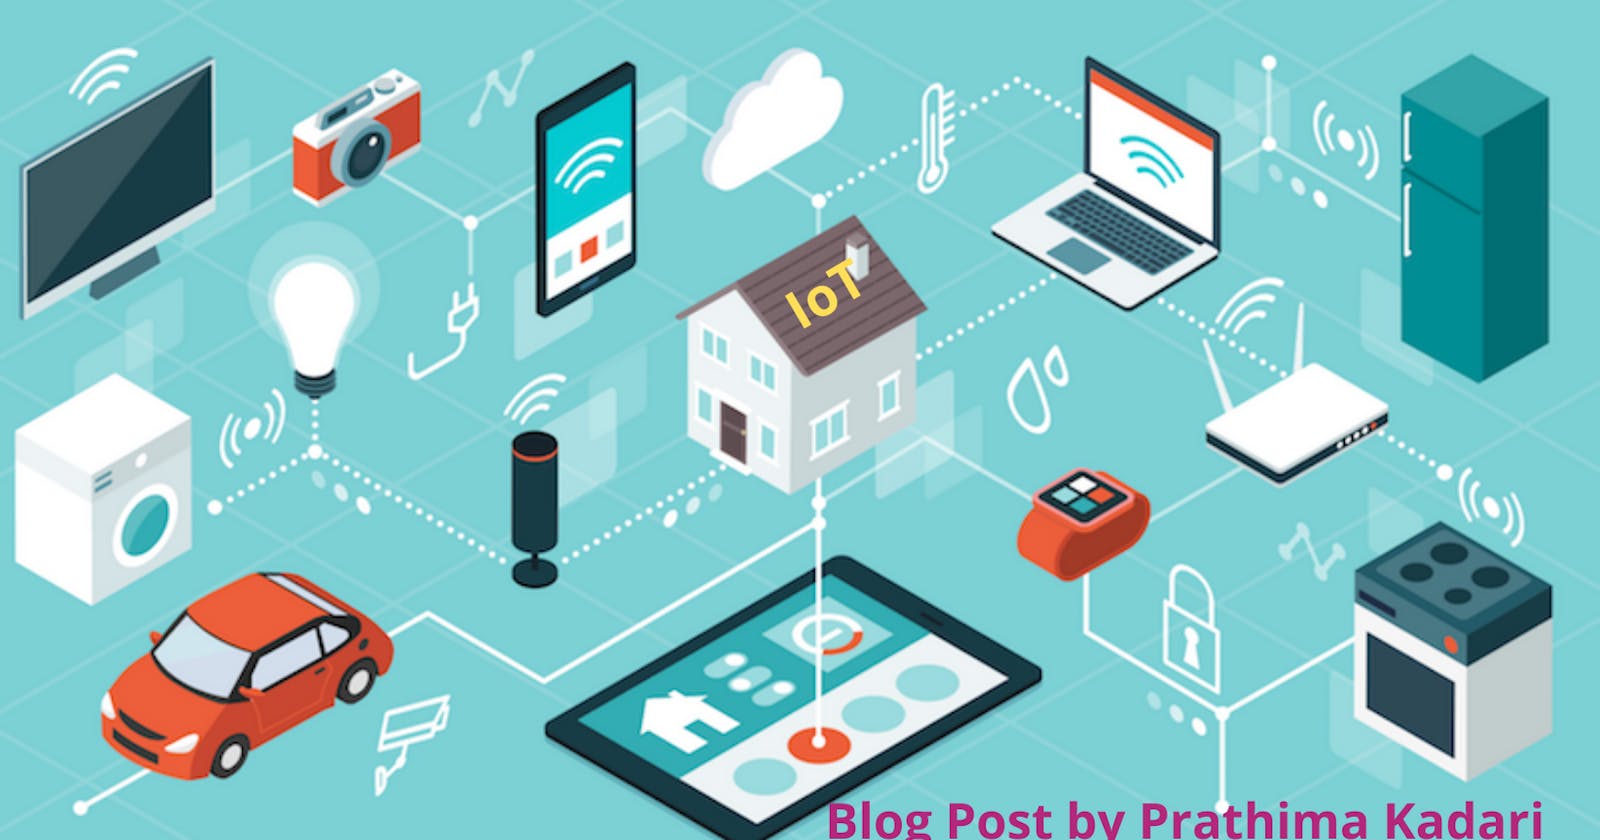 Getting Started with Internet of Things (IoT)